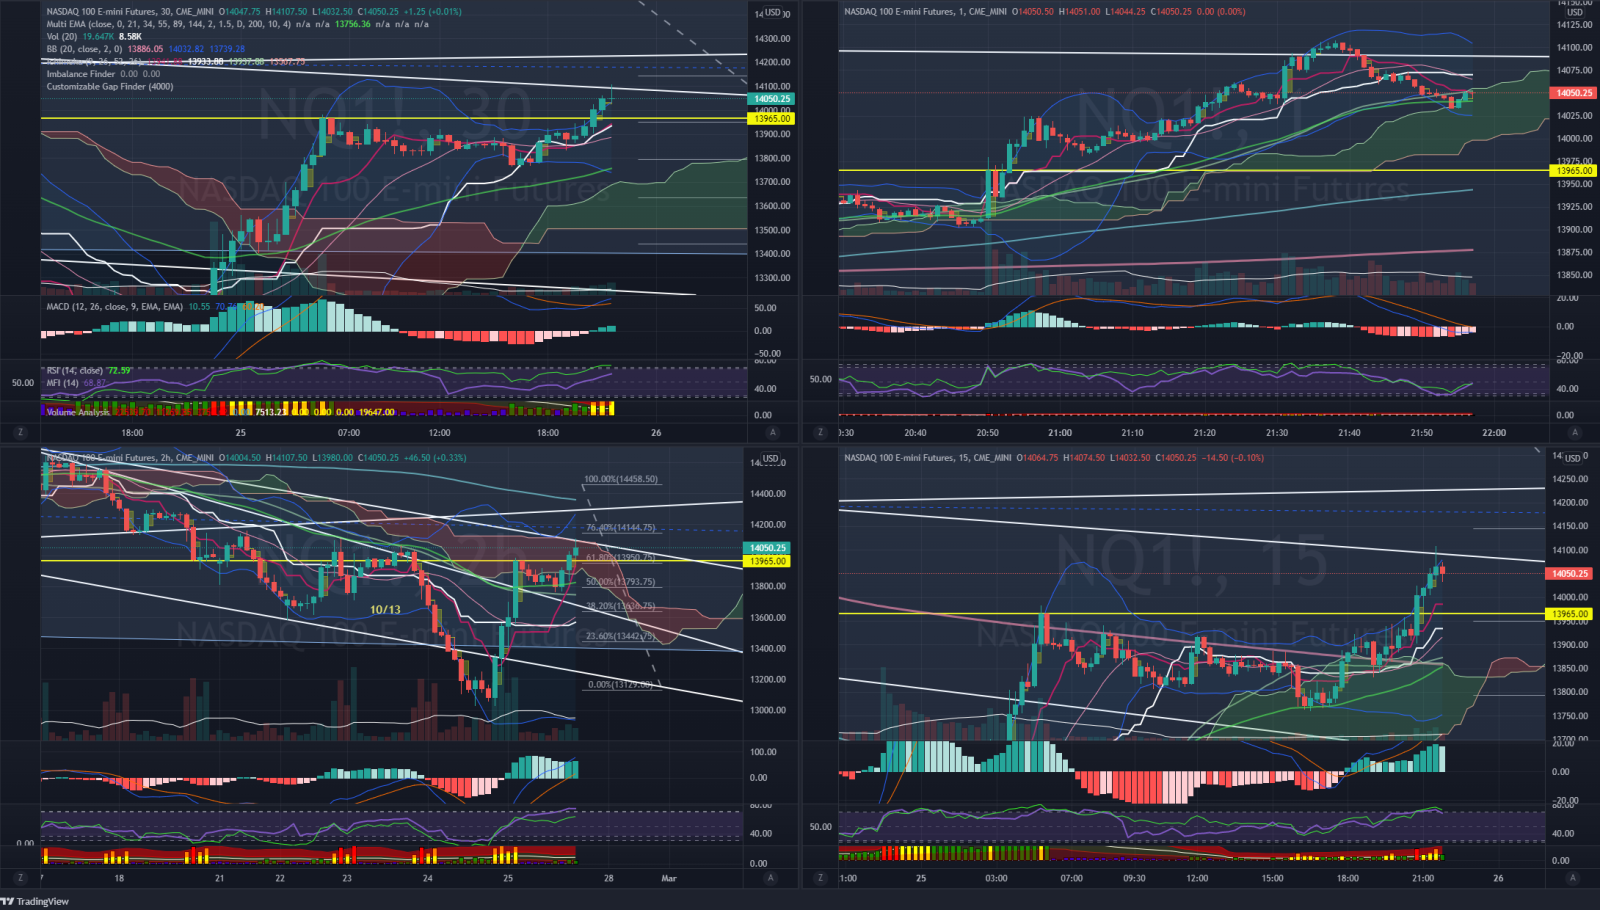 2H chart we have a bearish divergence on MACD